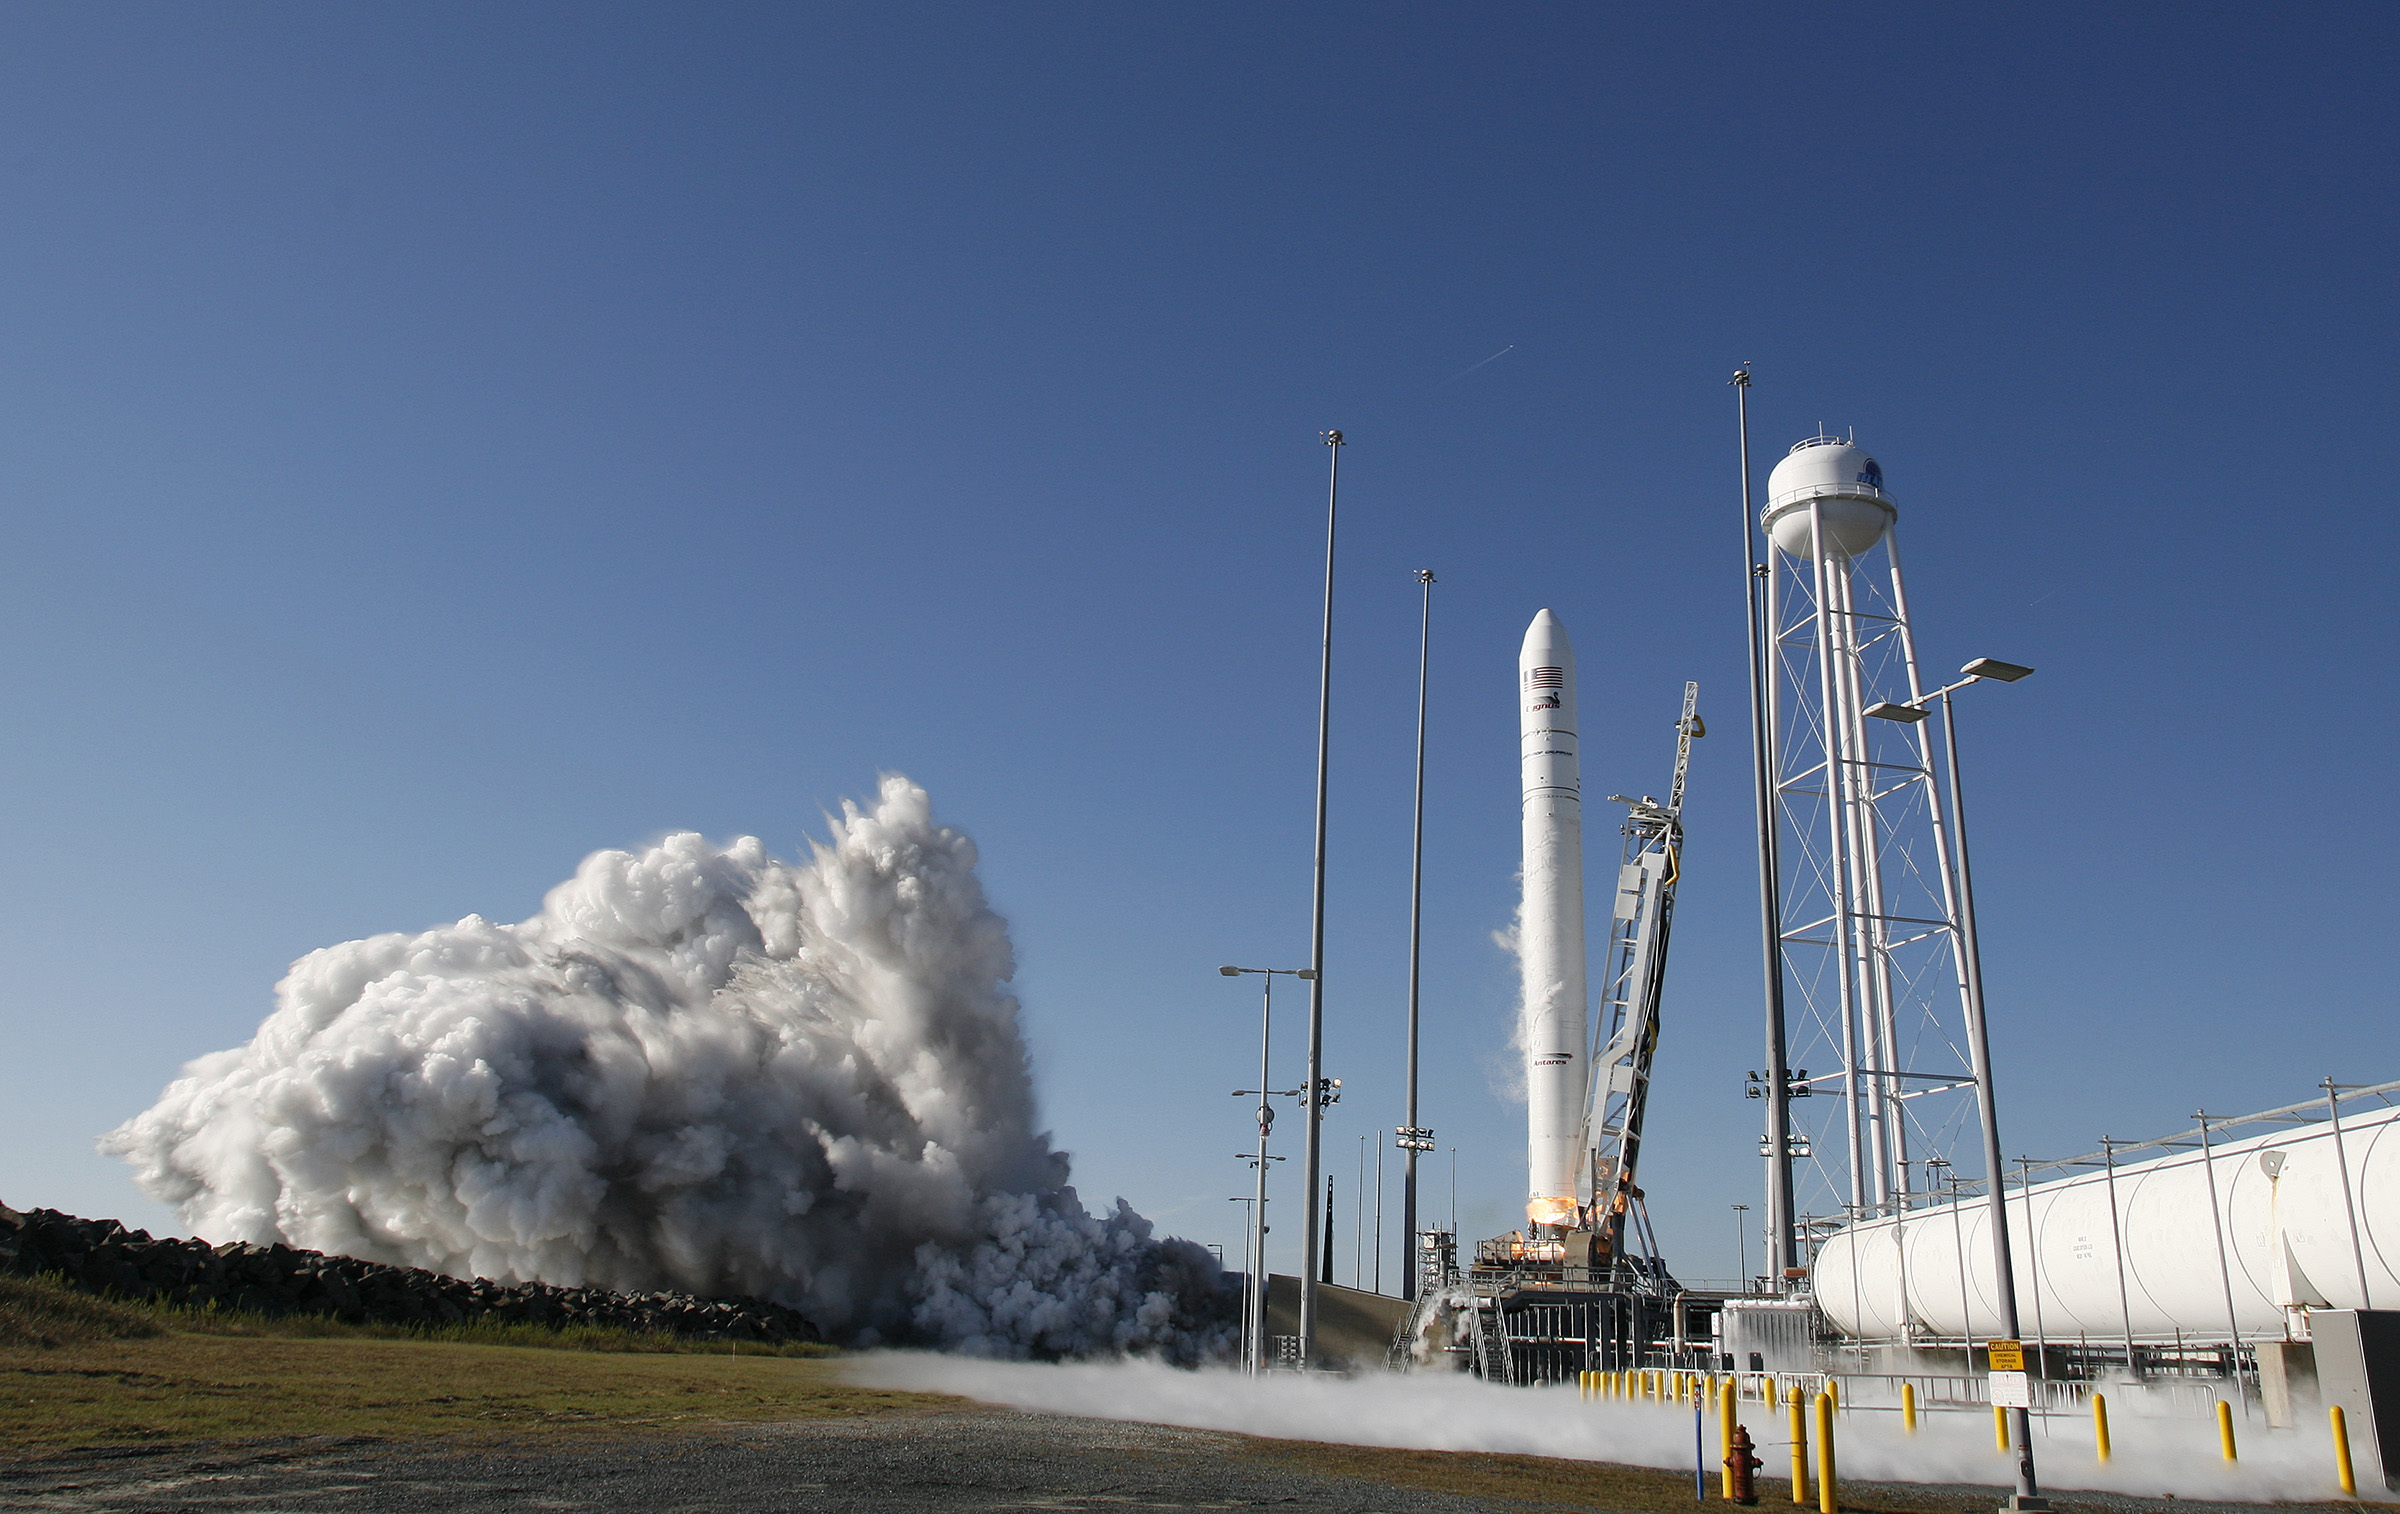 A rocket beginning to liftoff from launch pad in front of a blue sky